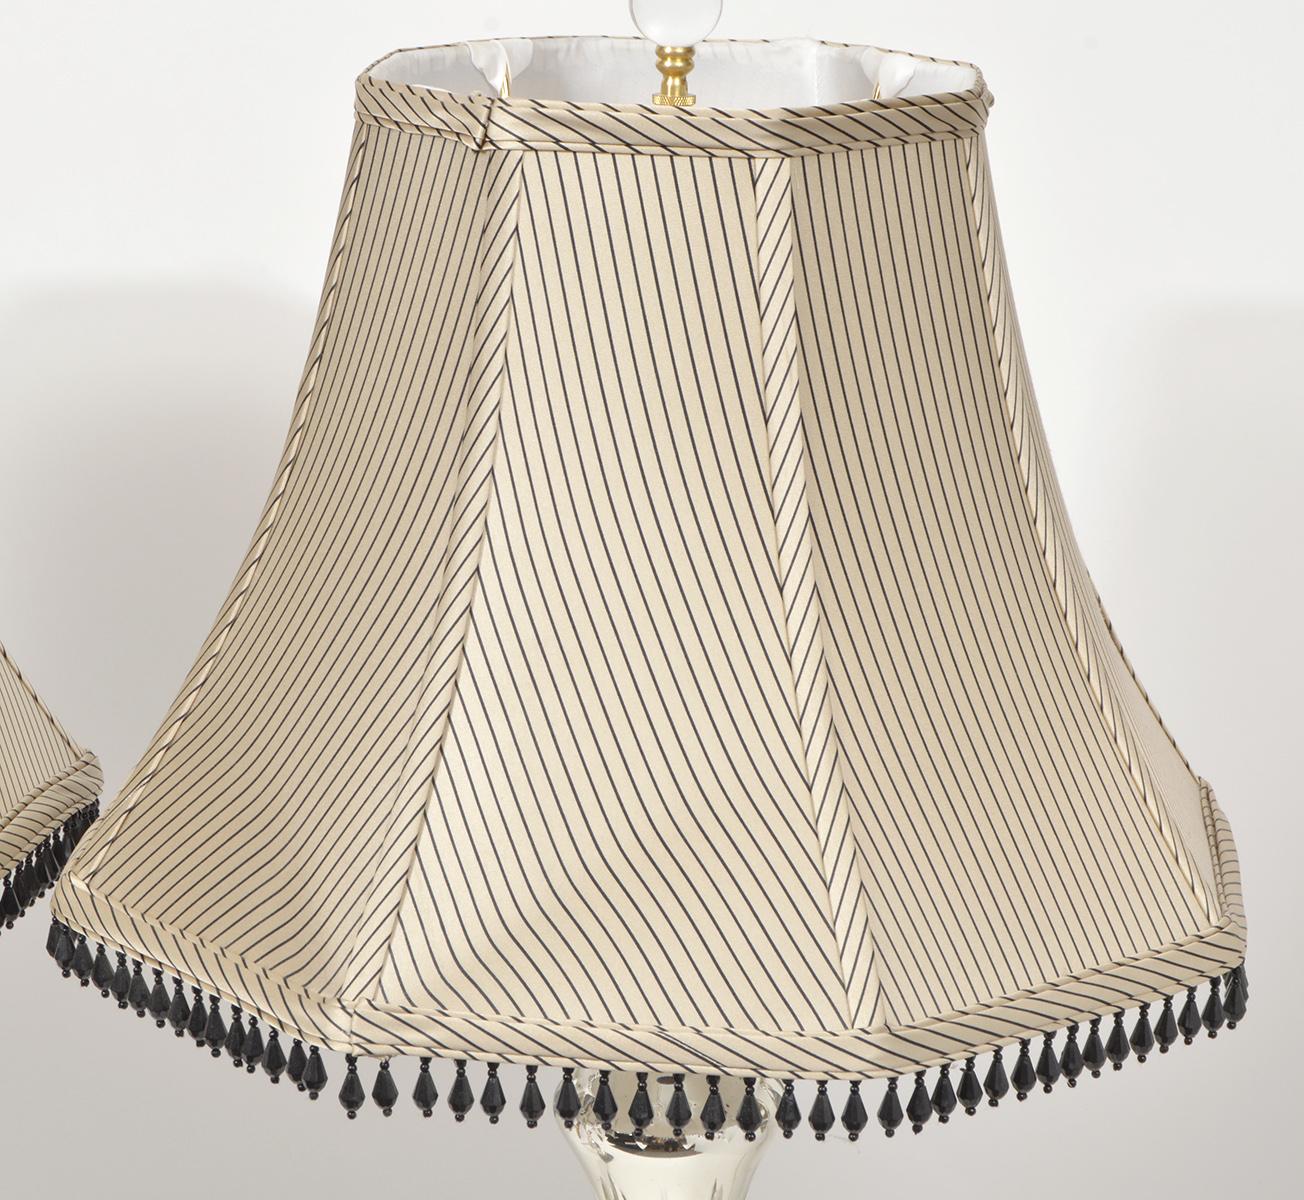 Mounted on patinated bronze bases the baluster shaped cut mercury glass gracefully reflect the light, early 20th century. Above the glass archantus shaped bronze mounts support the light fixtures. The elegant lampshades are trimmed with cut glass